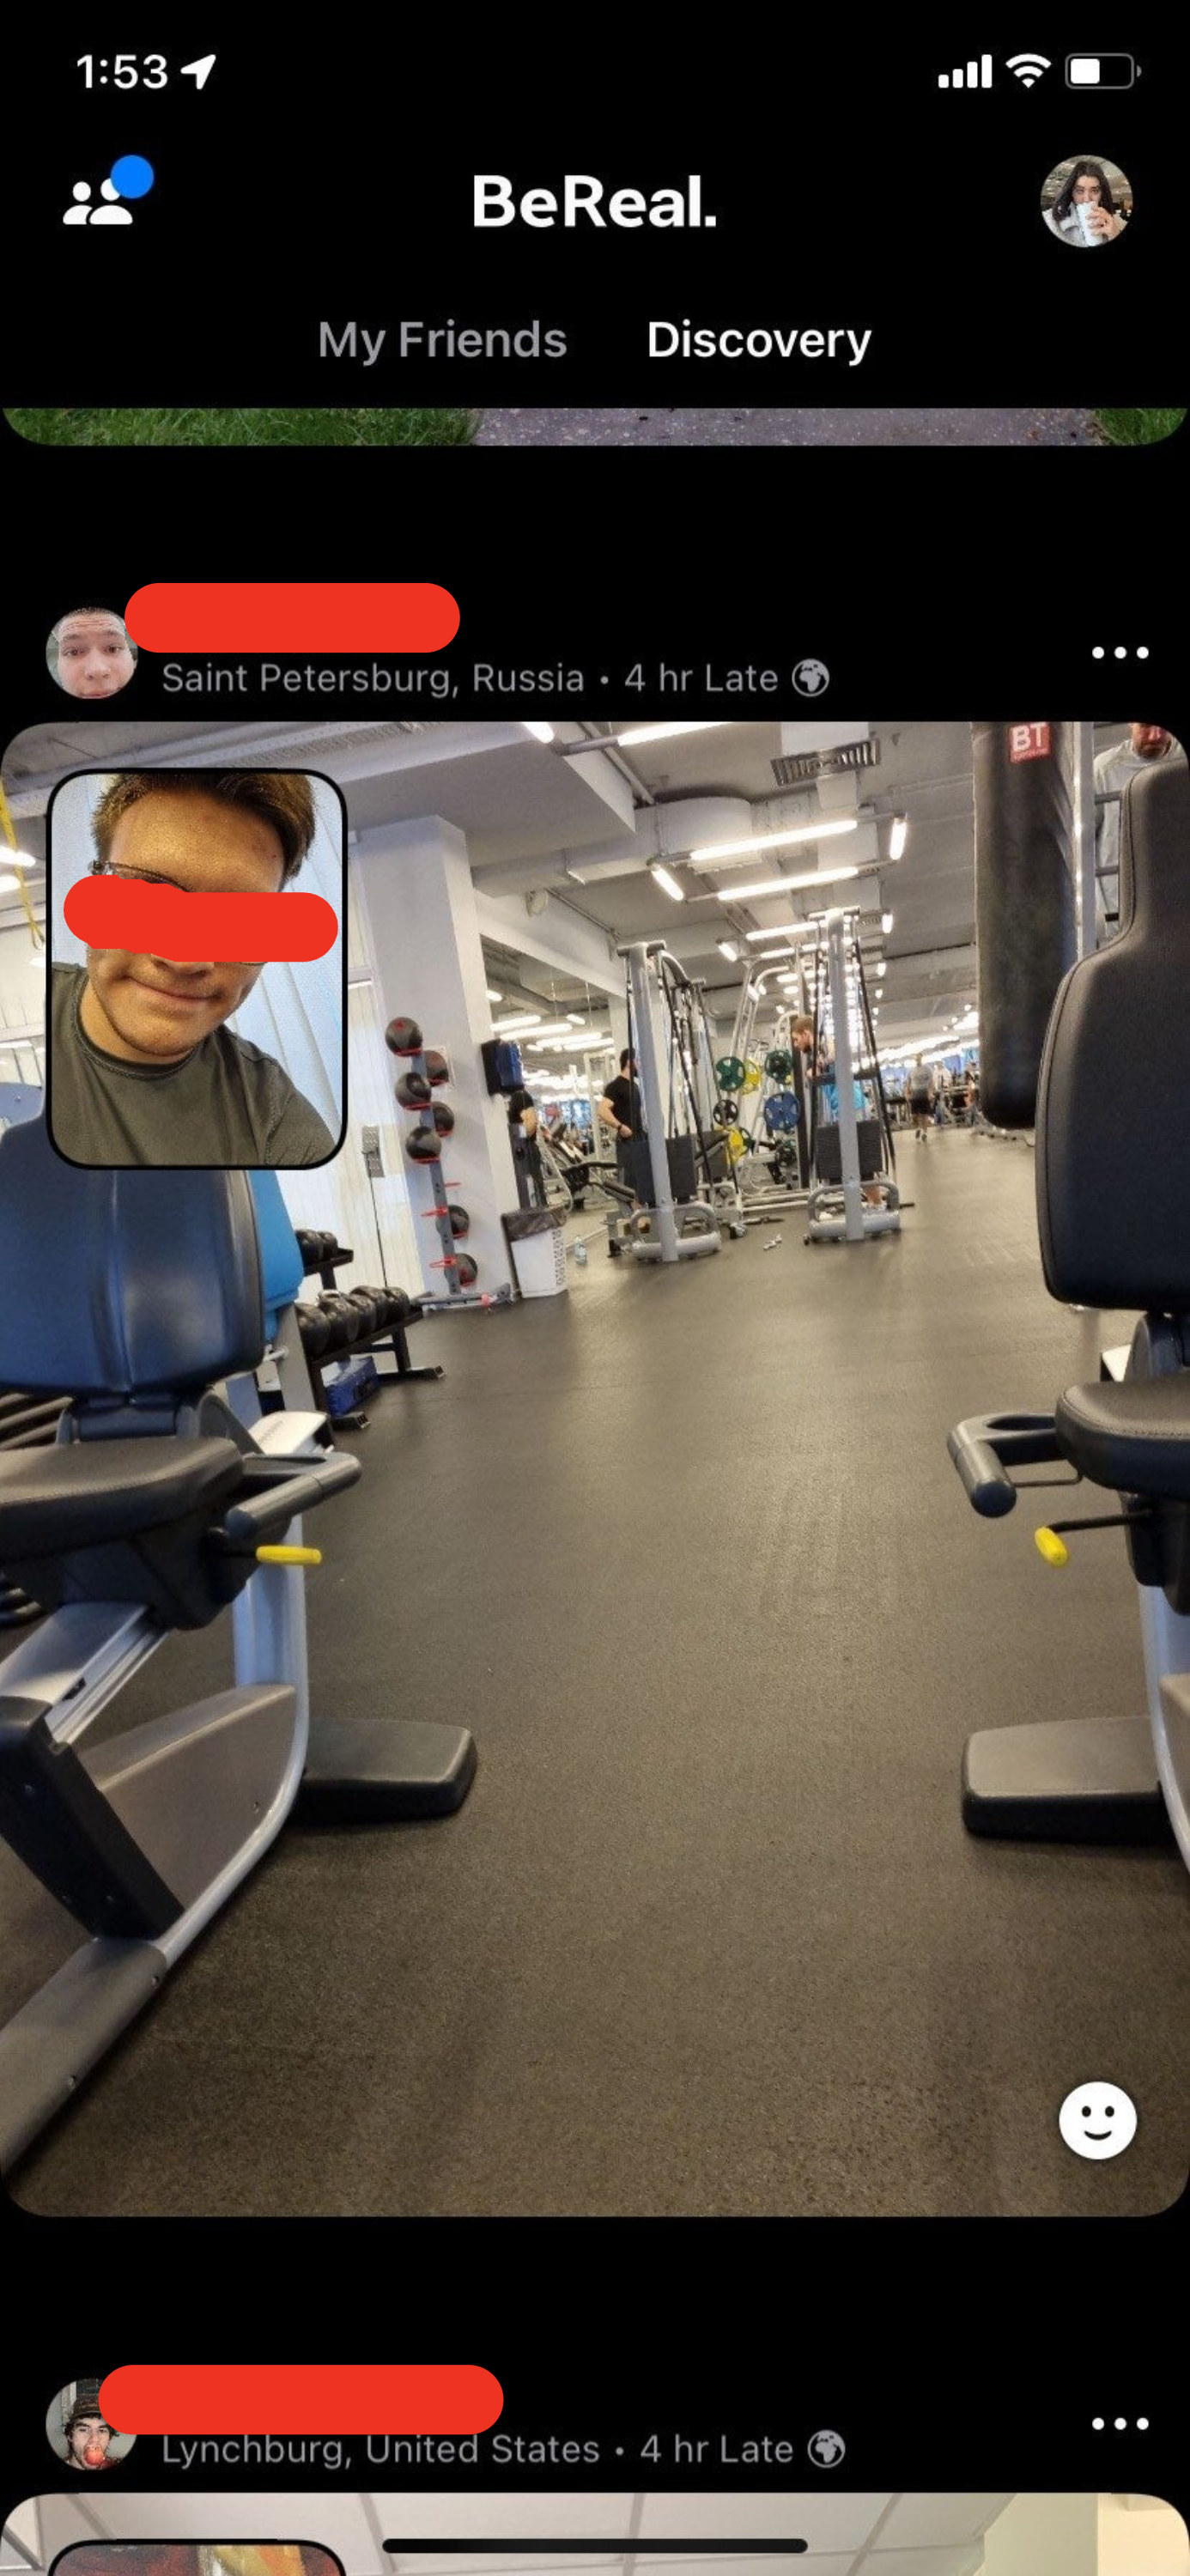 Someone in Saint Petersburg, Russia at the gym, again with the name and face crossed out